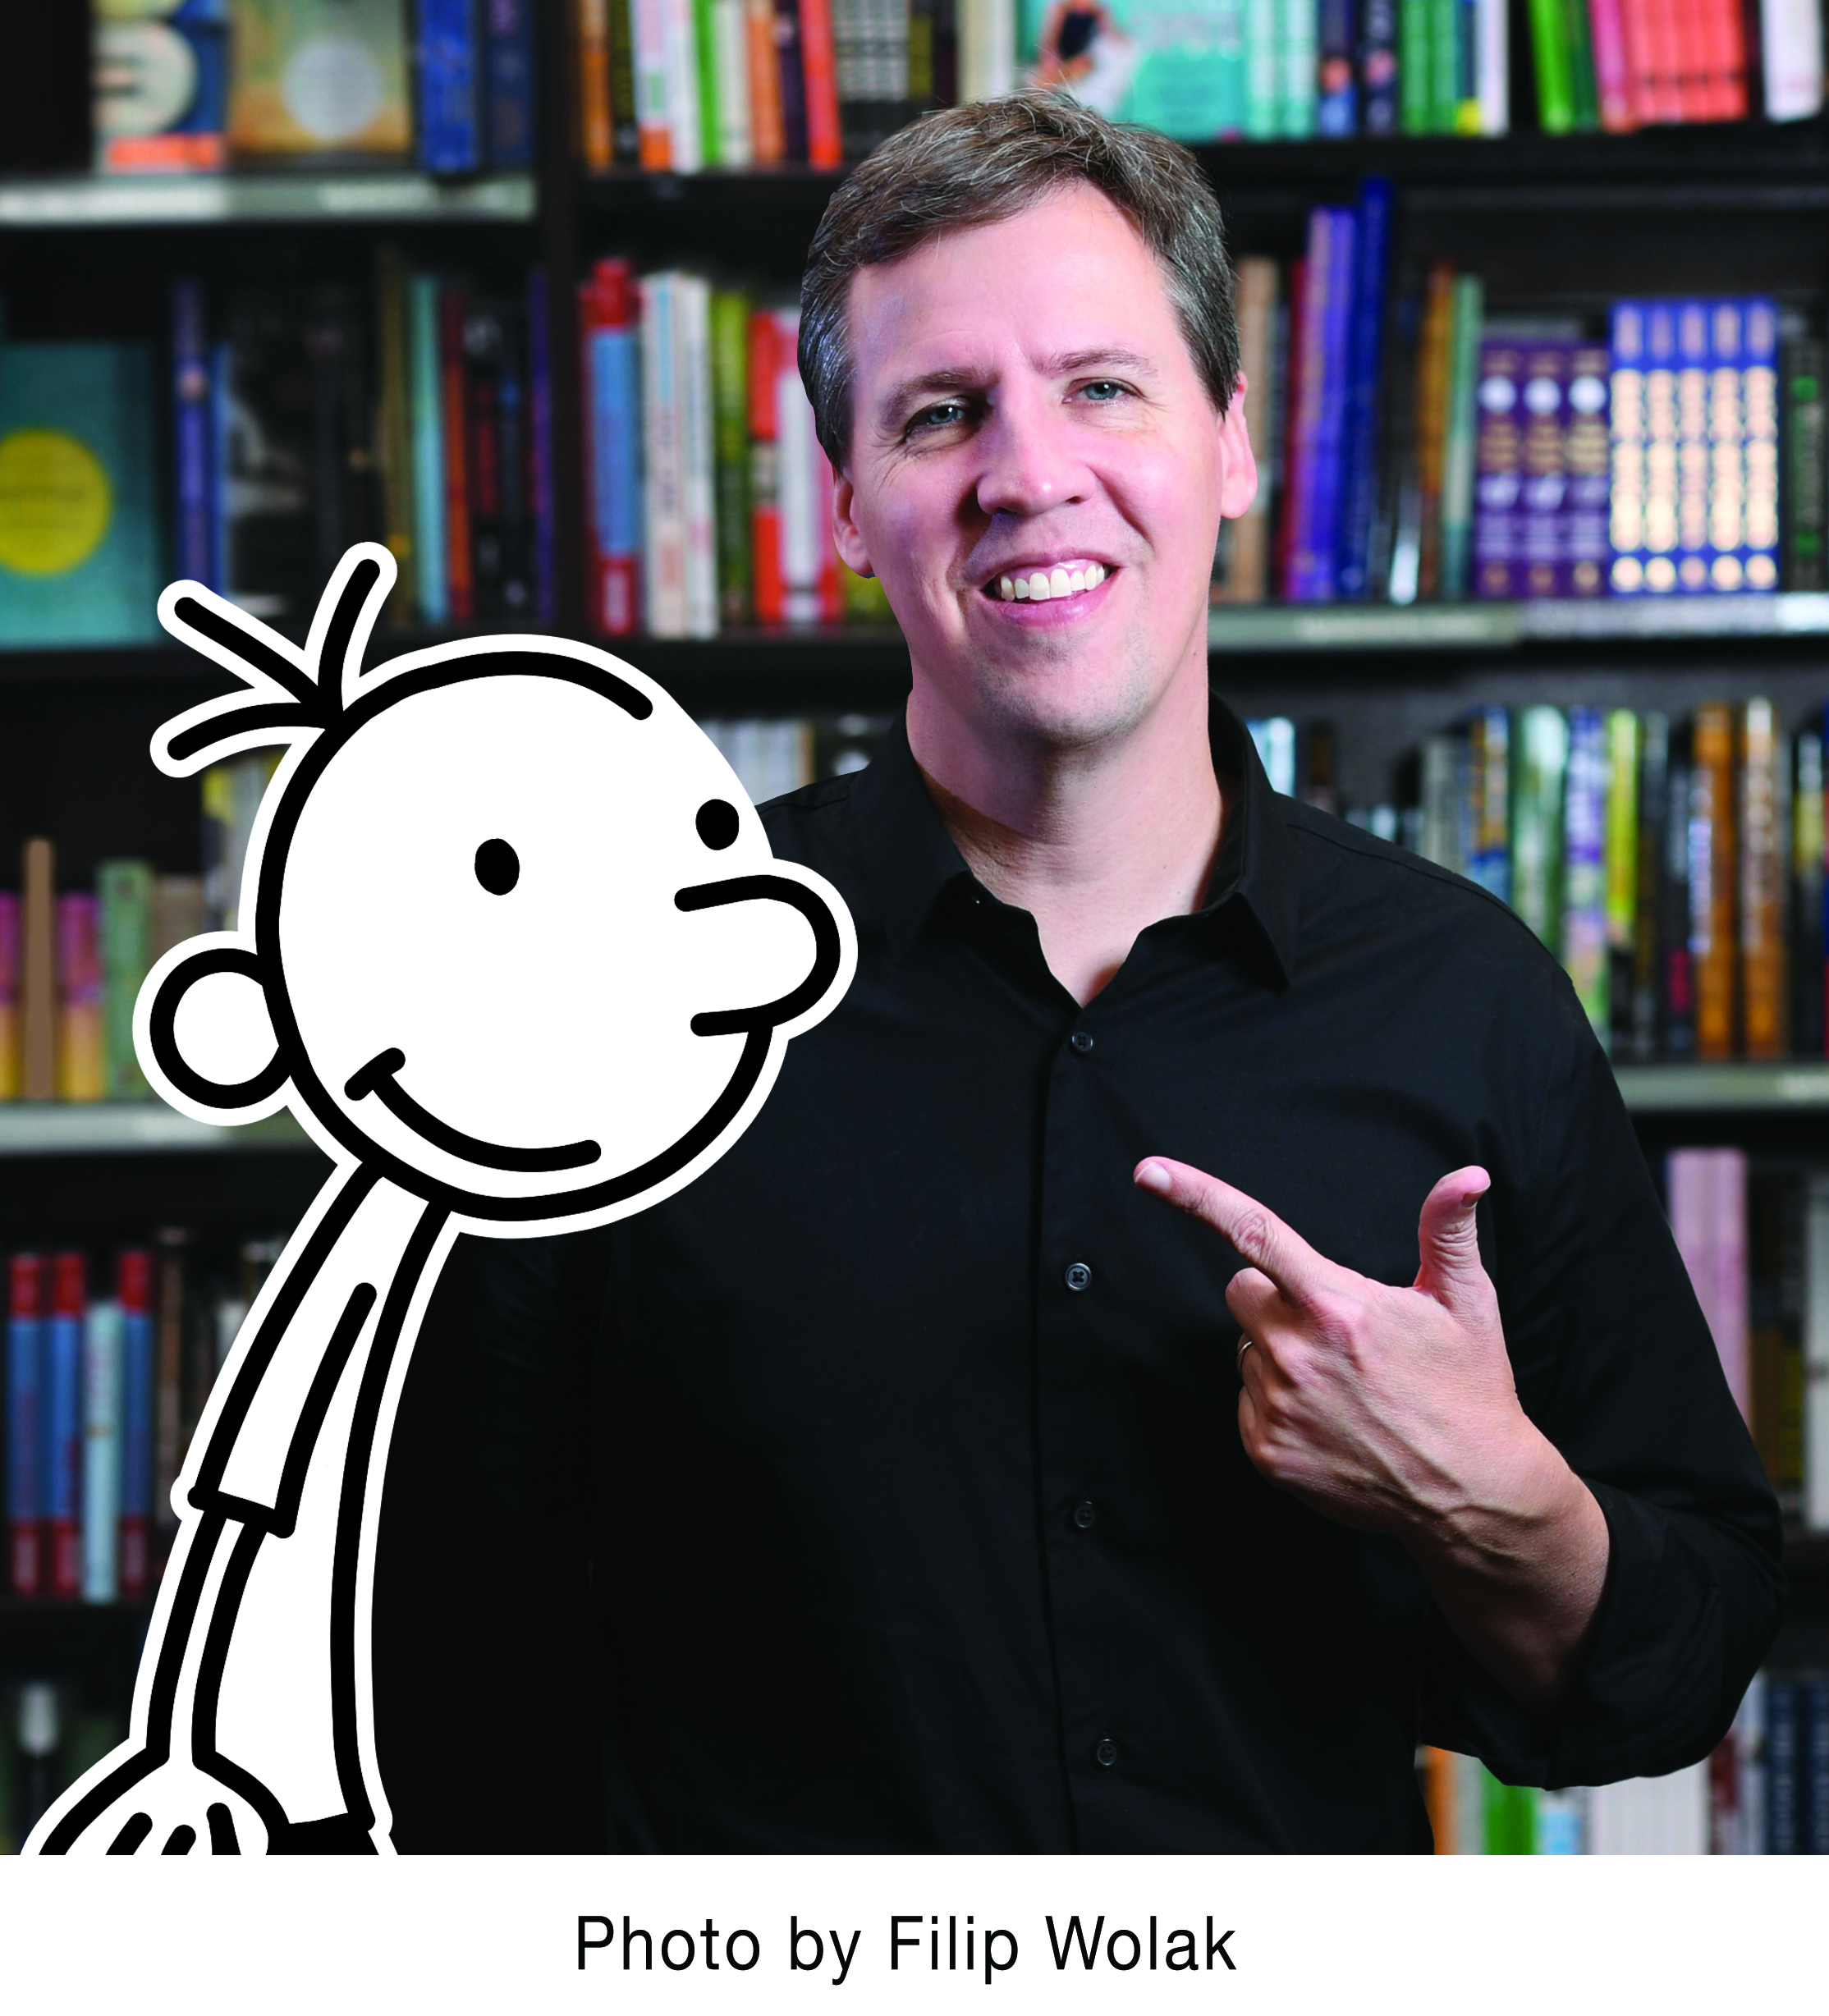 Diary of a Wimpy Kid (Special Disney+ Cover by Kinney, Jeff